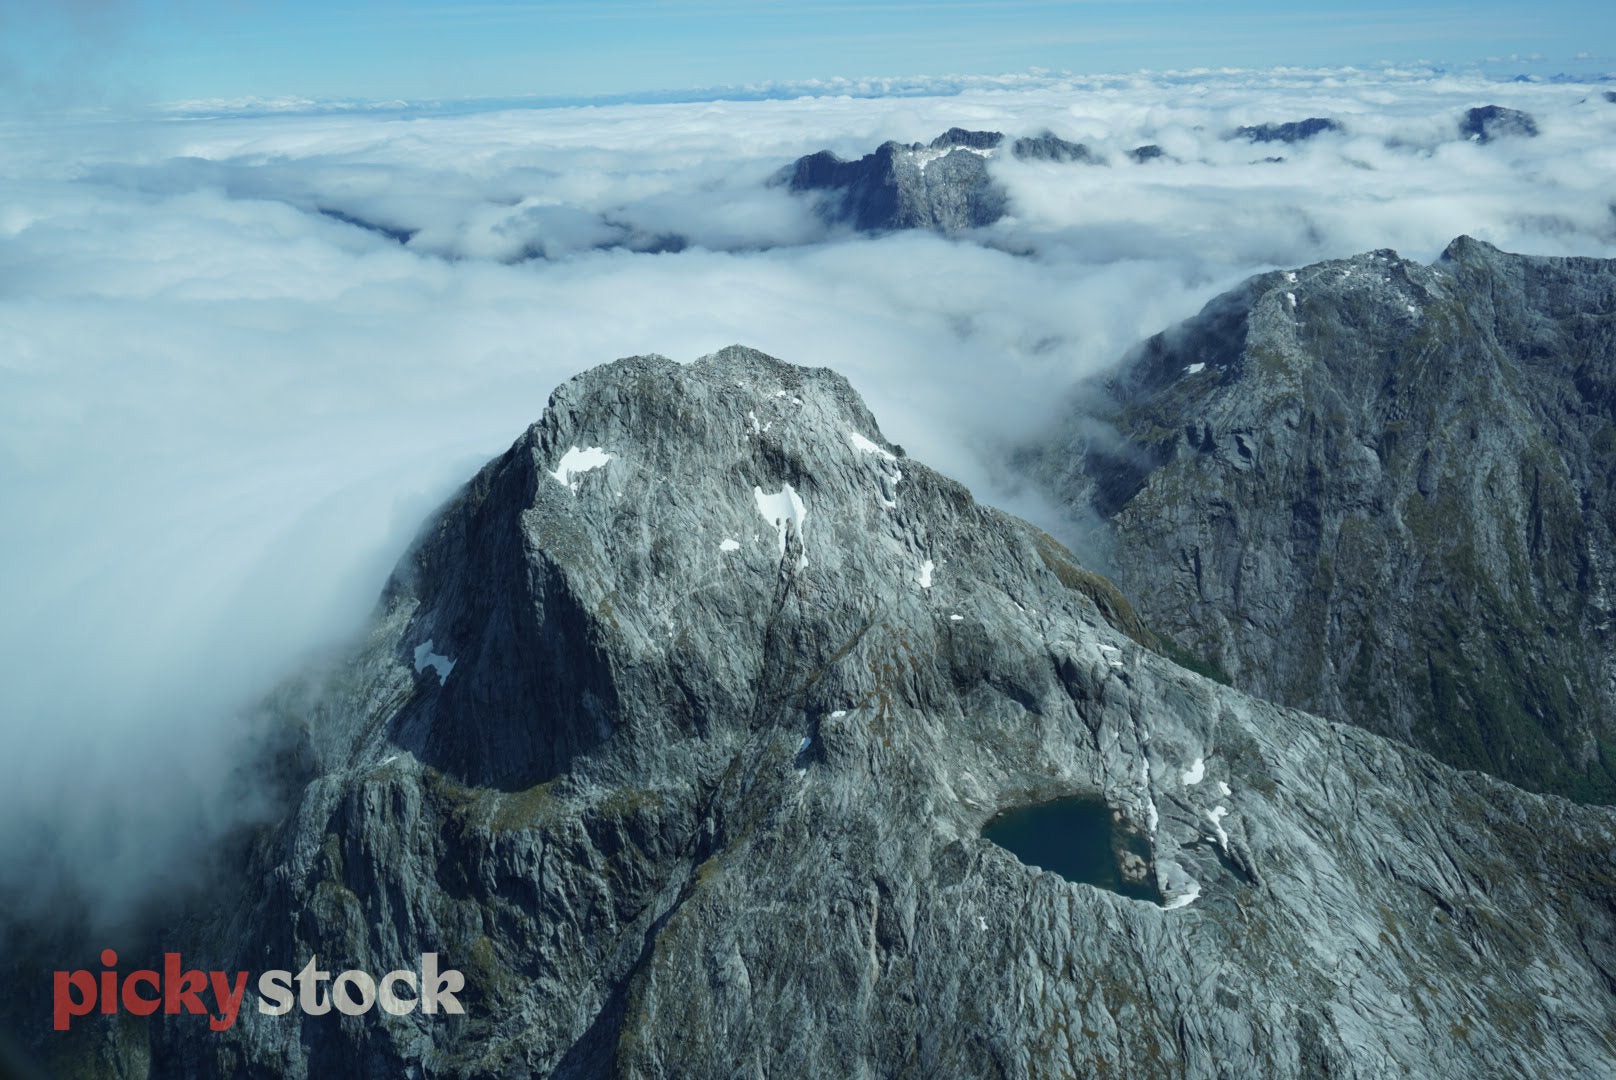 A New Zealand mountain top seen from cloud level, the misty clouds roll in between the grey, sheer, mountain peaks. 